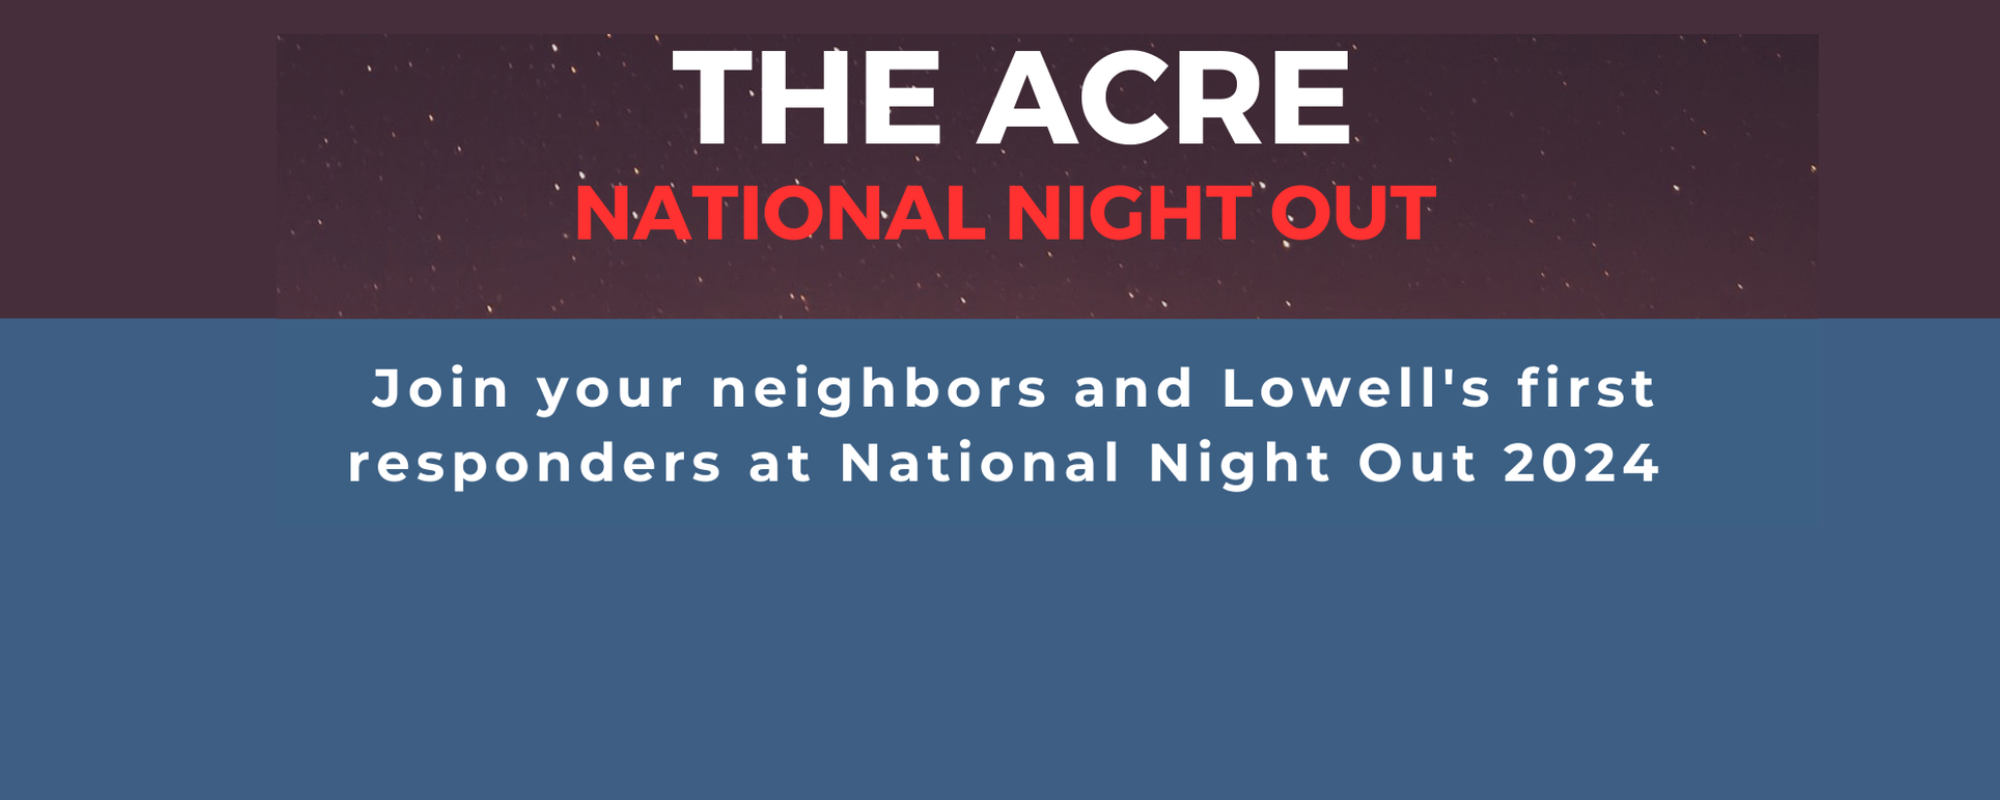 National Night Out flyer Header